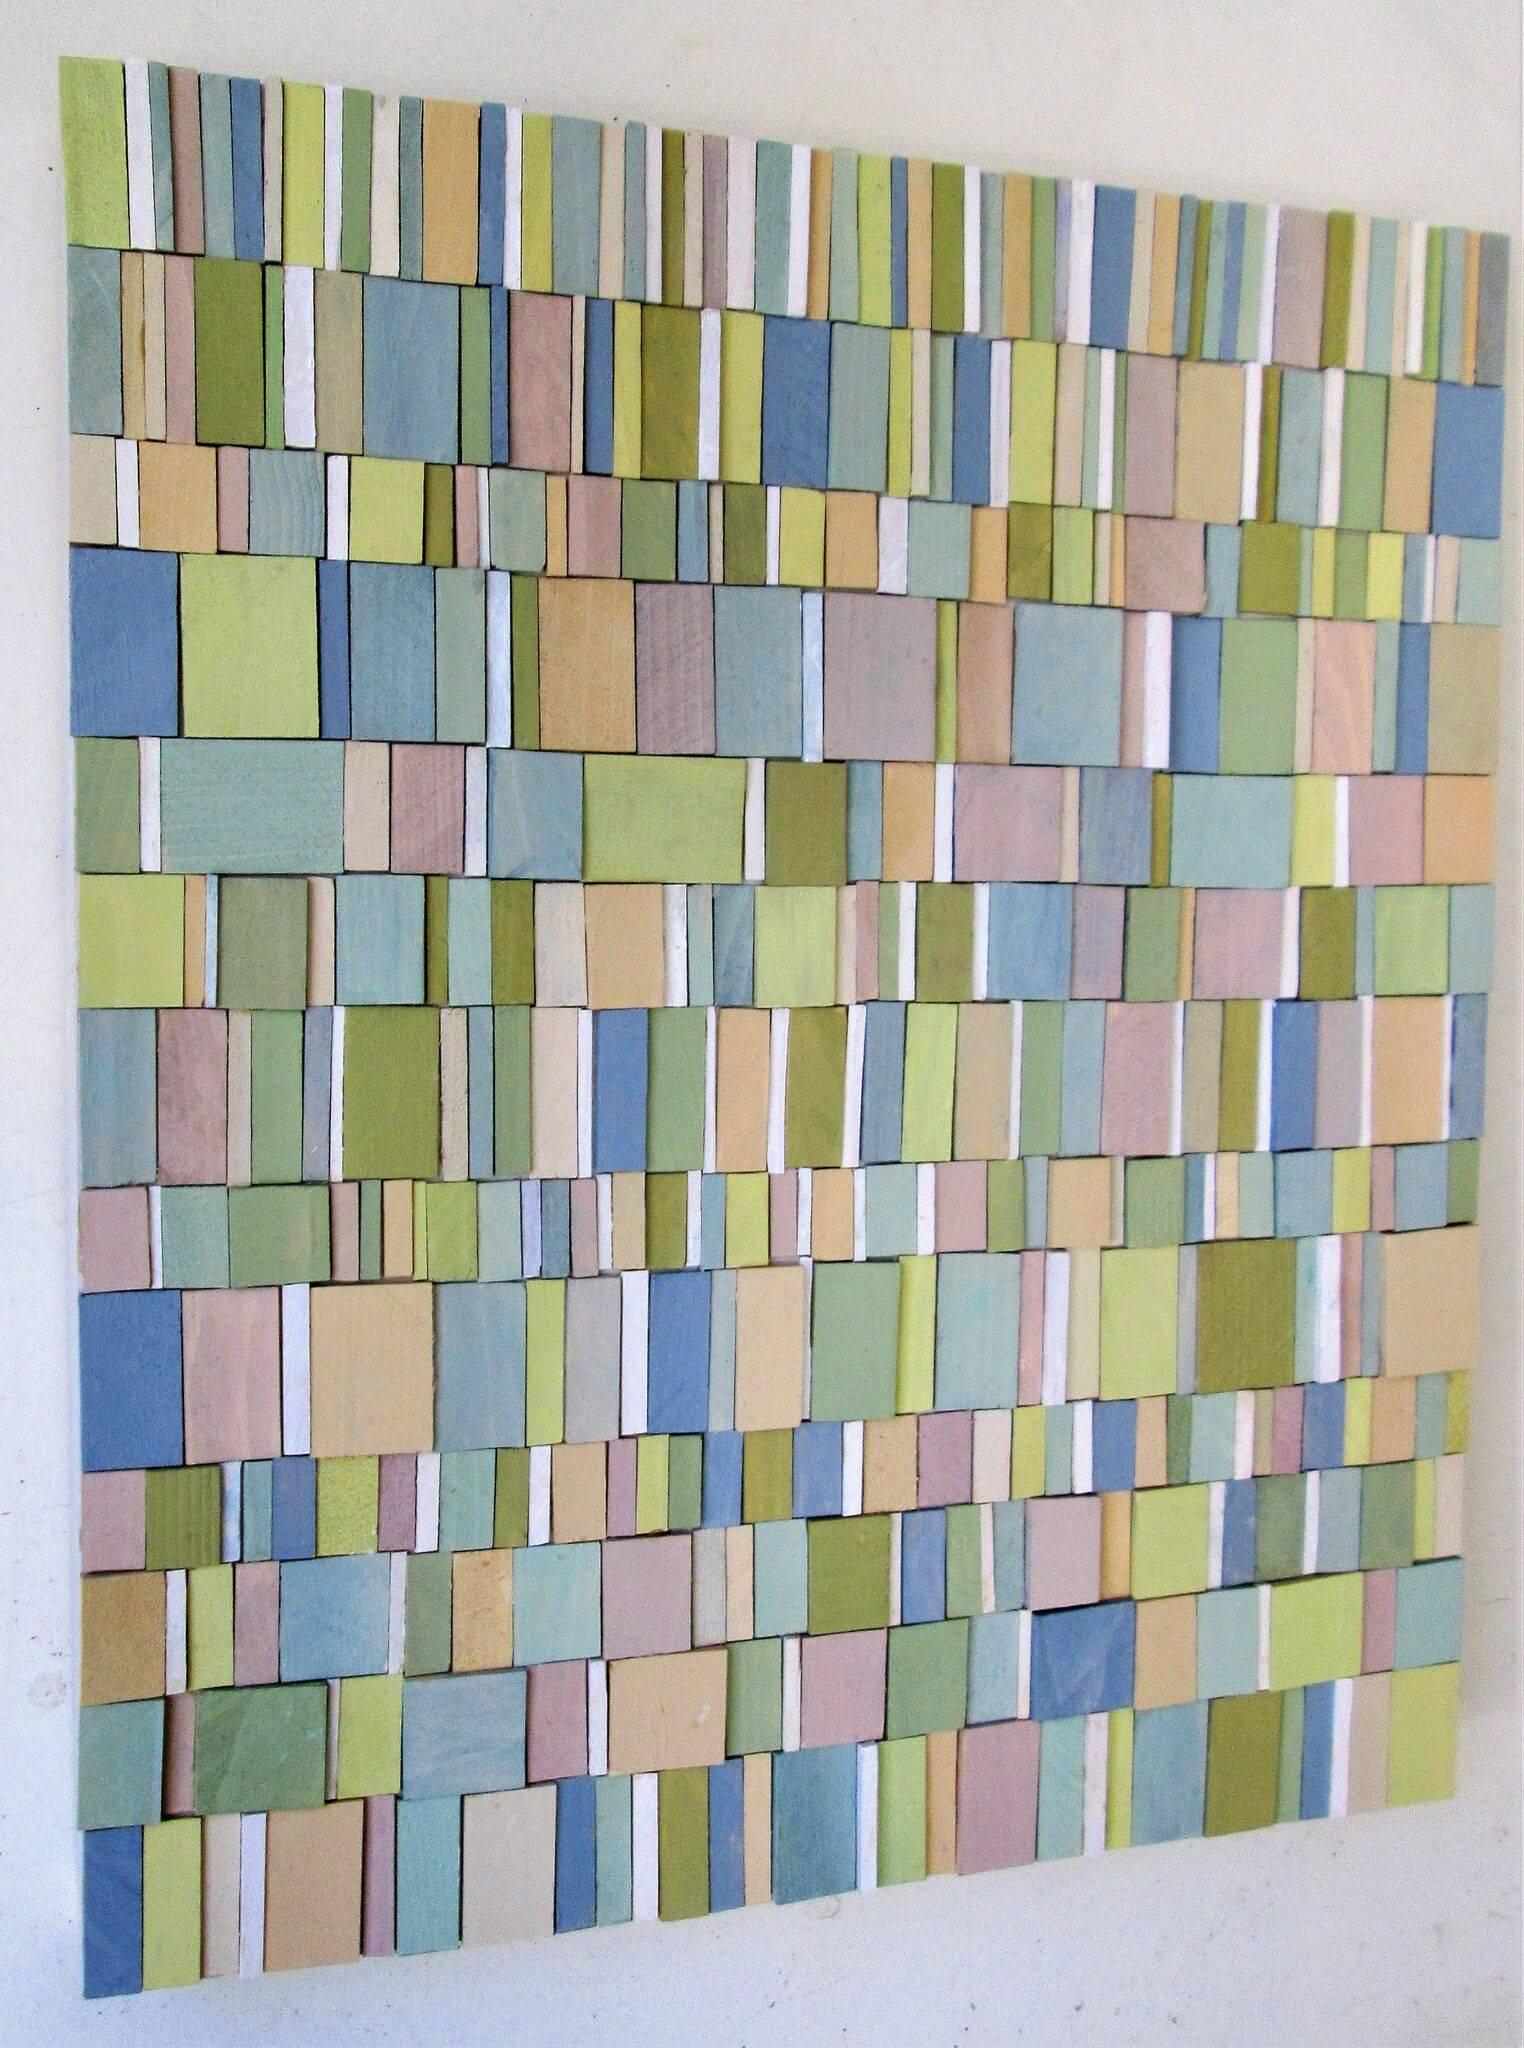 abstract three-dimensional wall sculpture, acrylic and wood on panel 
carved strips of painted wood in shades of pastel blue, green, pink, and purple
22 x 19 x 2 inches, can be oriented vertically or horizontally 

Dynamic and graphic wall sculpture